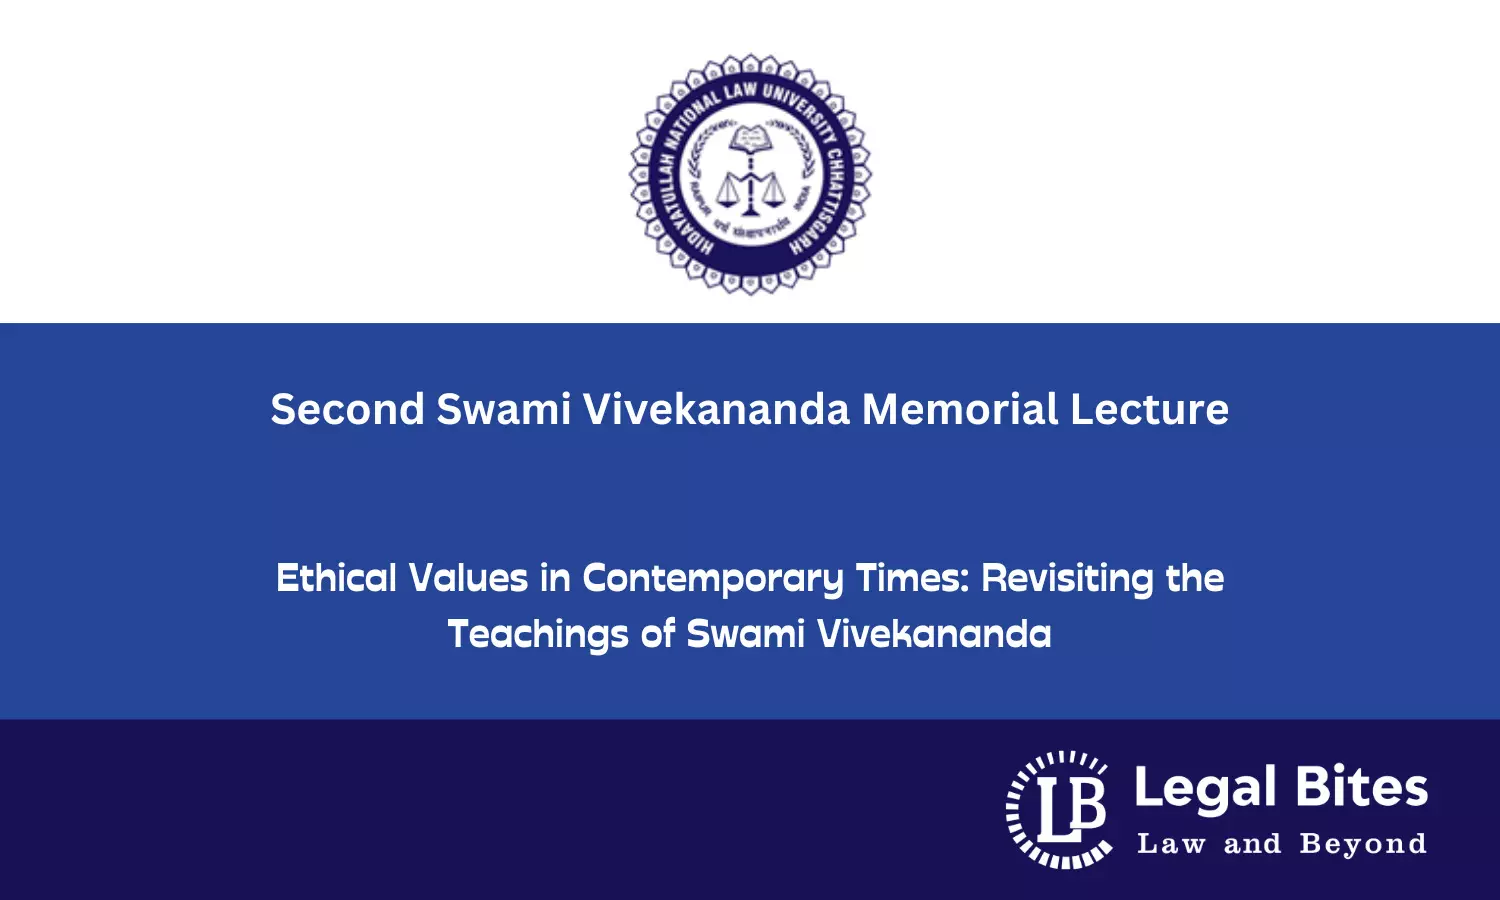 Ethical Values in Contemporary Times: Revisiting the Teachings of Swami Vivekananda